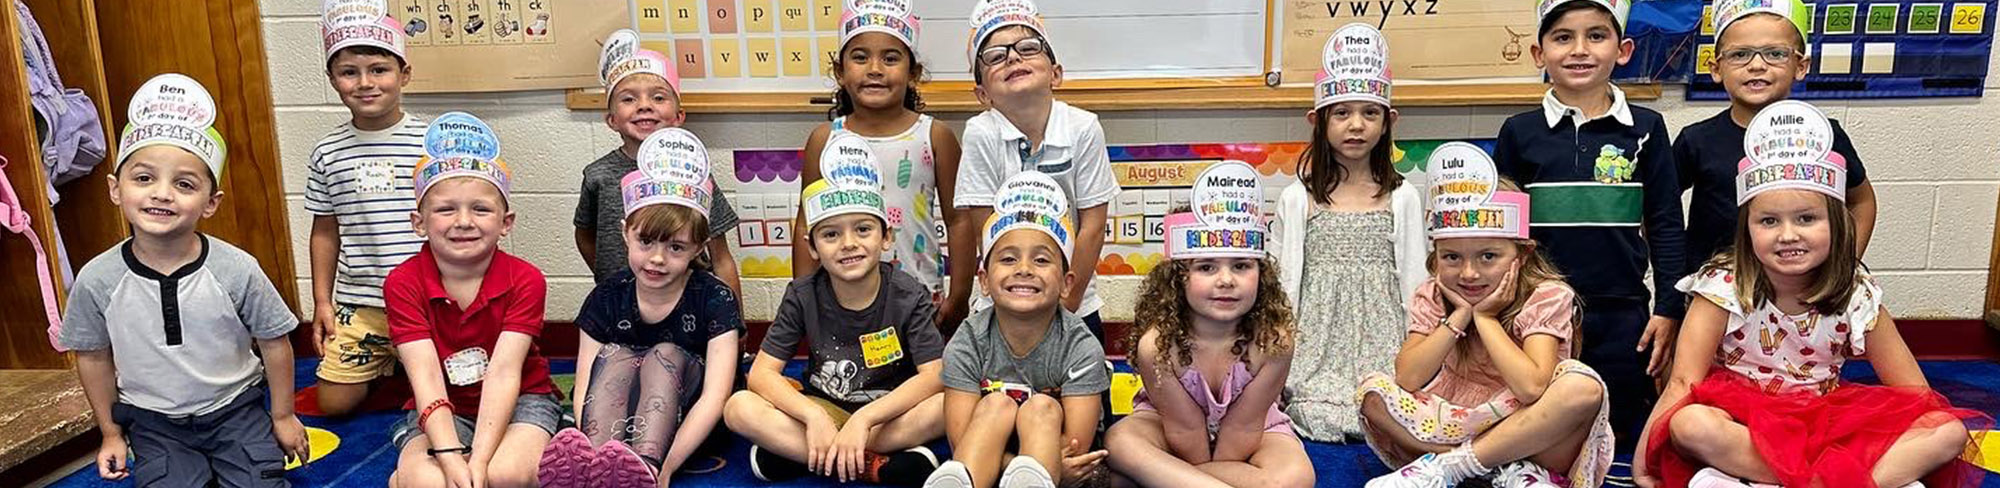 Class of younger students wearing paper hats